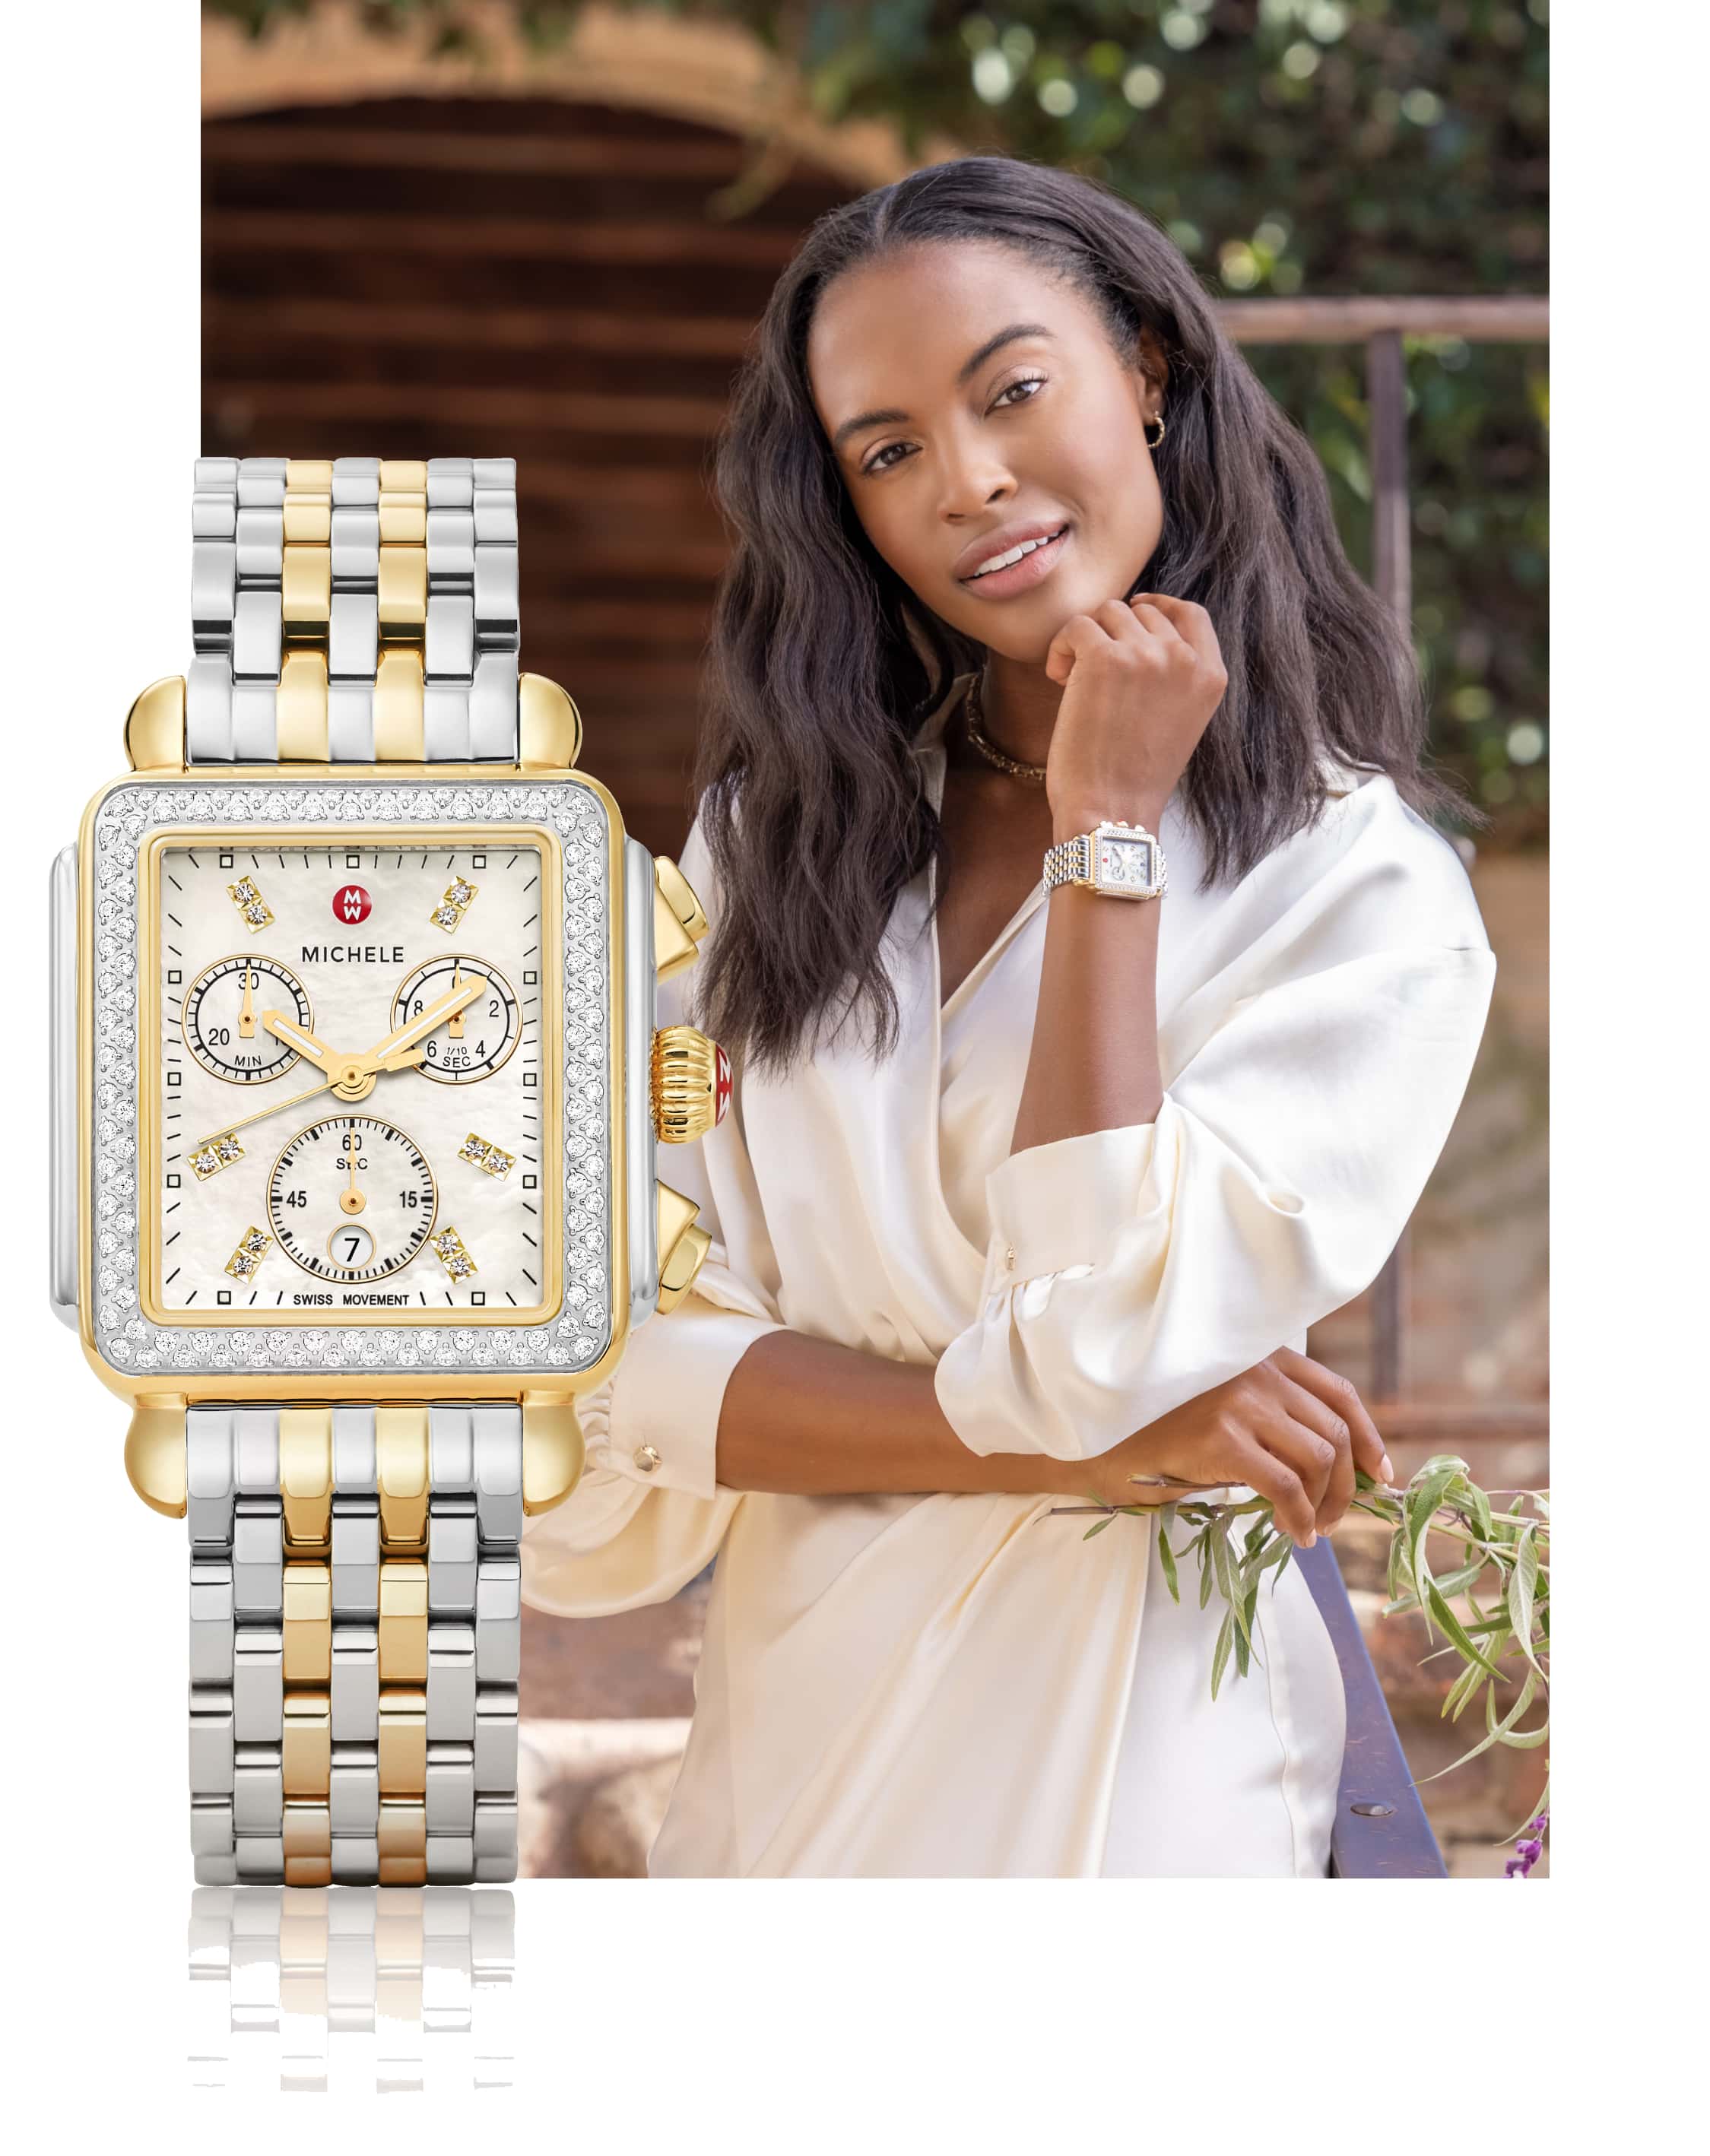 Stylish young woman wearing in a white dress wearing two-tone Deco Chronograph watch.